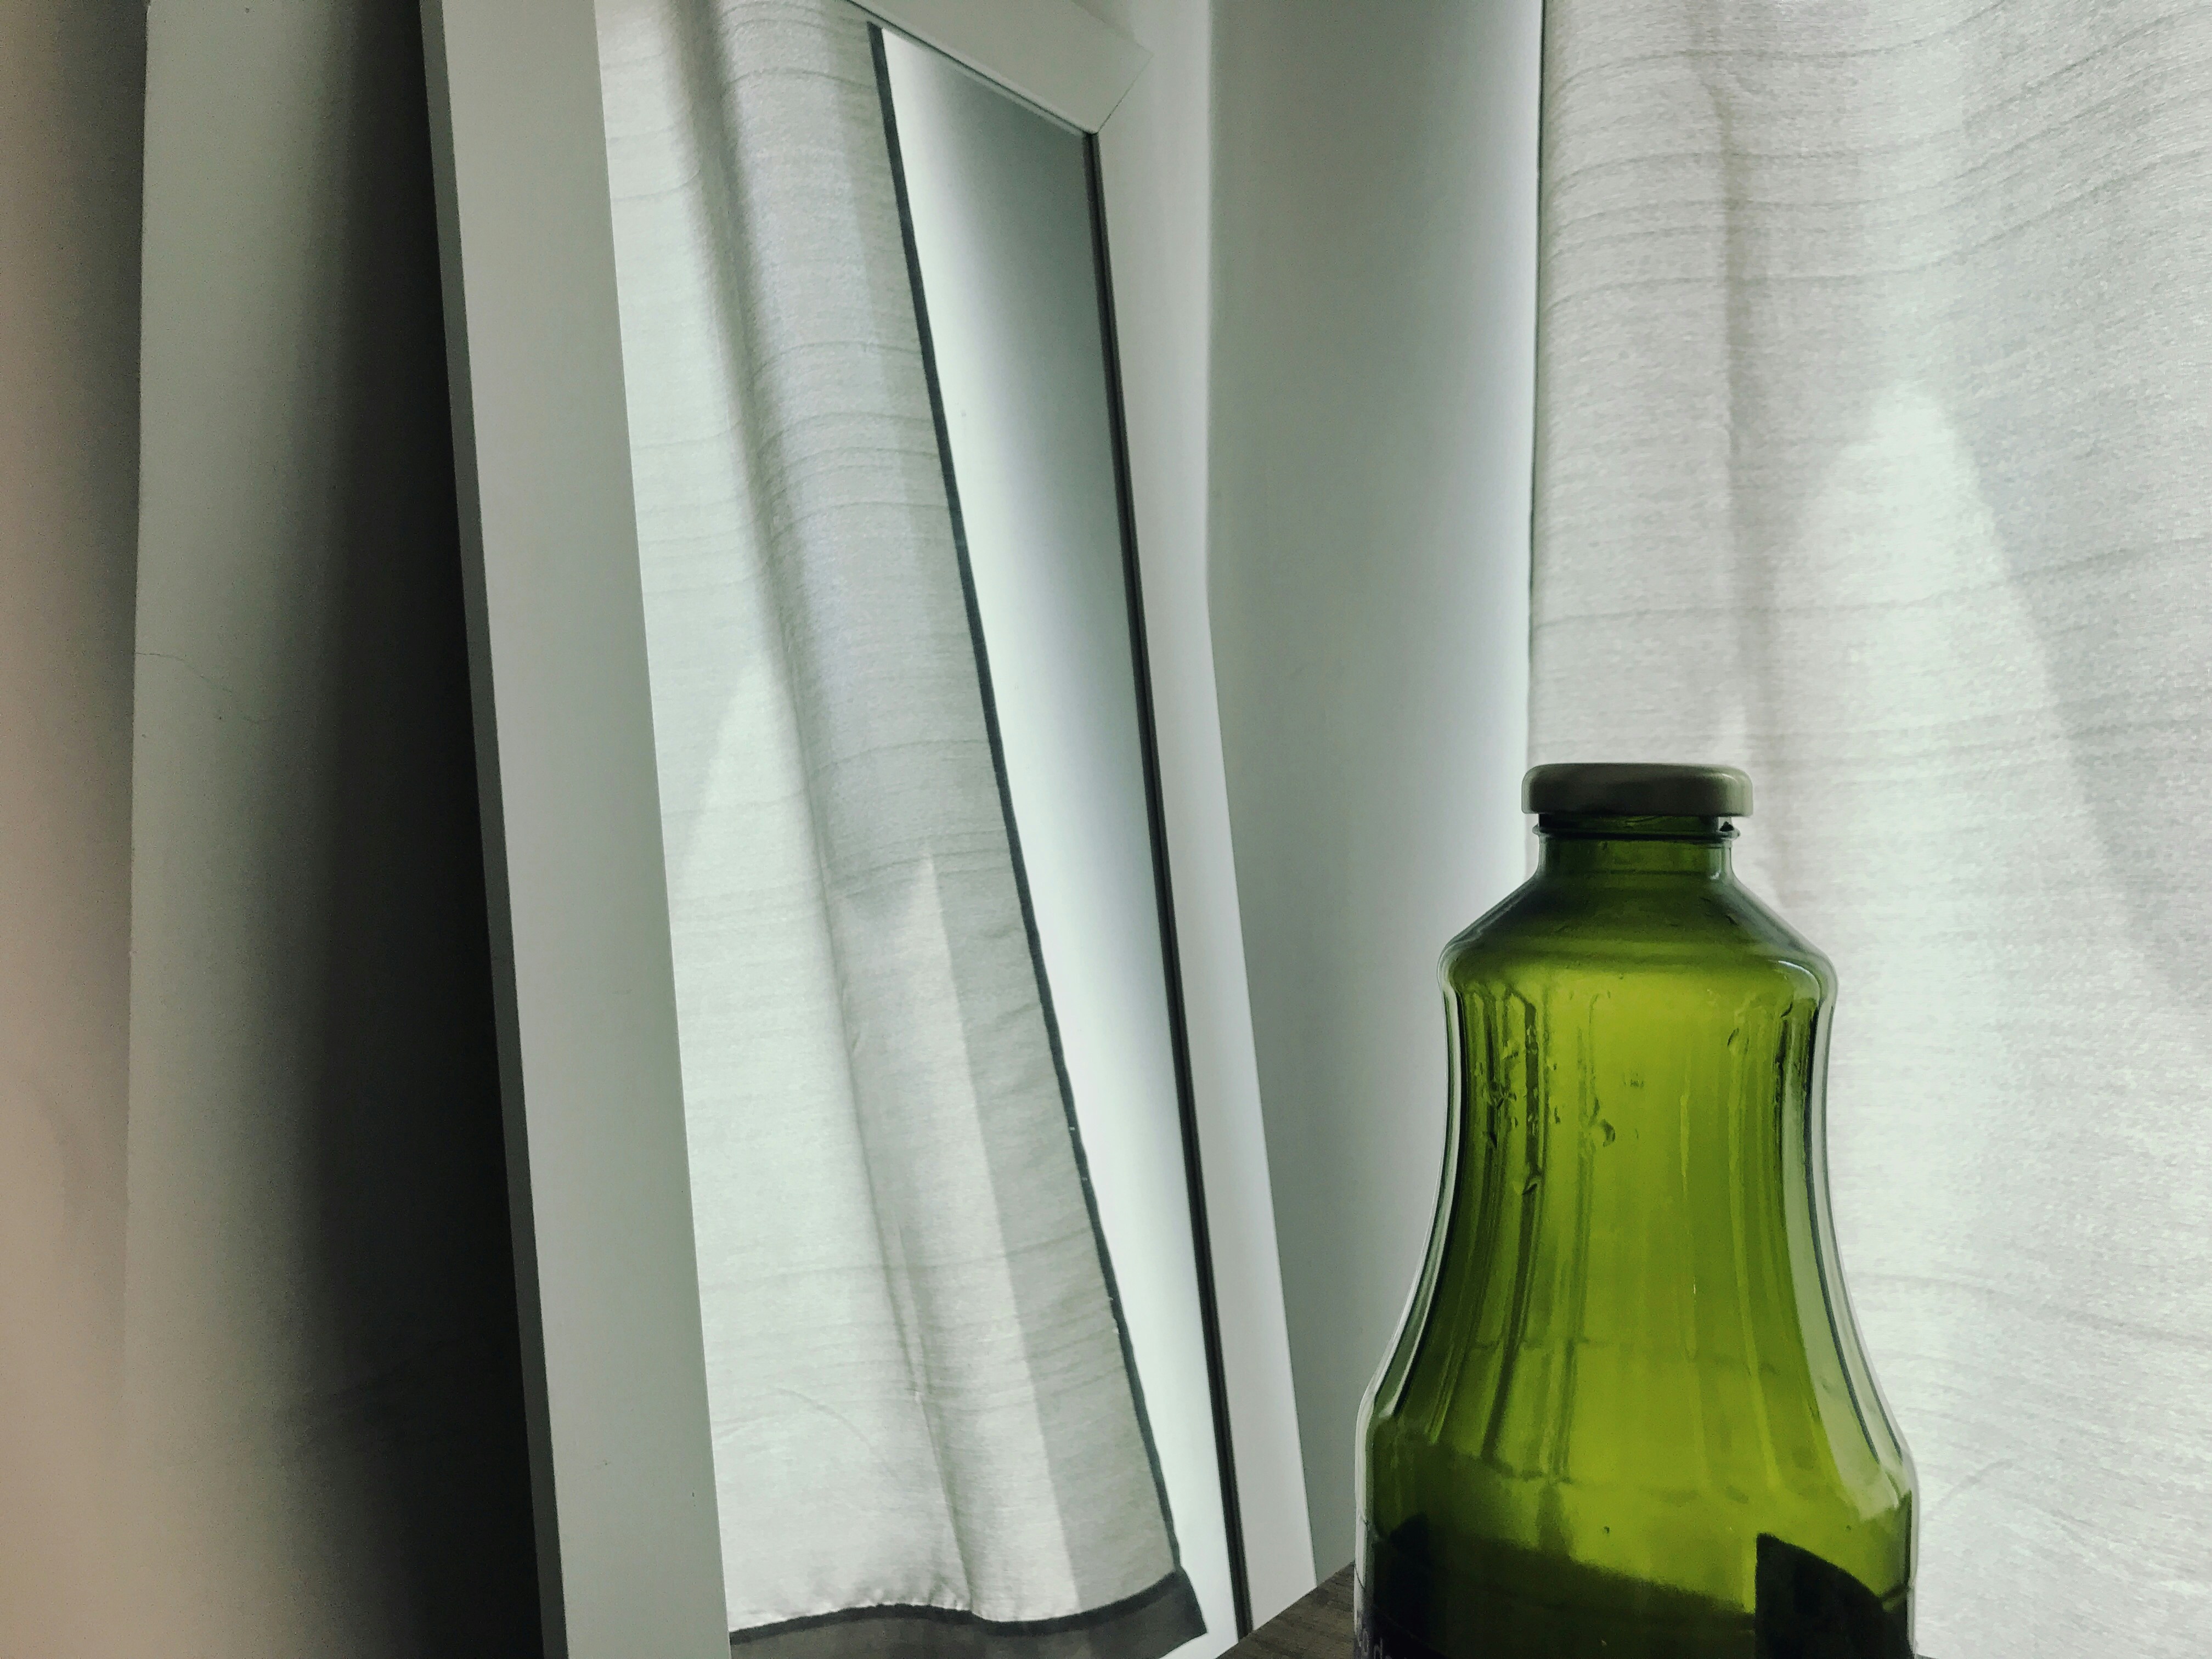 A mirror by the window with a bottle in the front